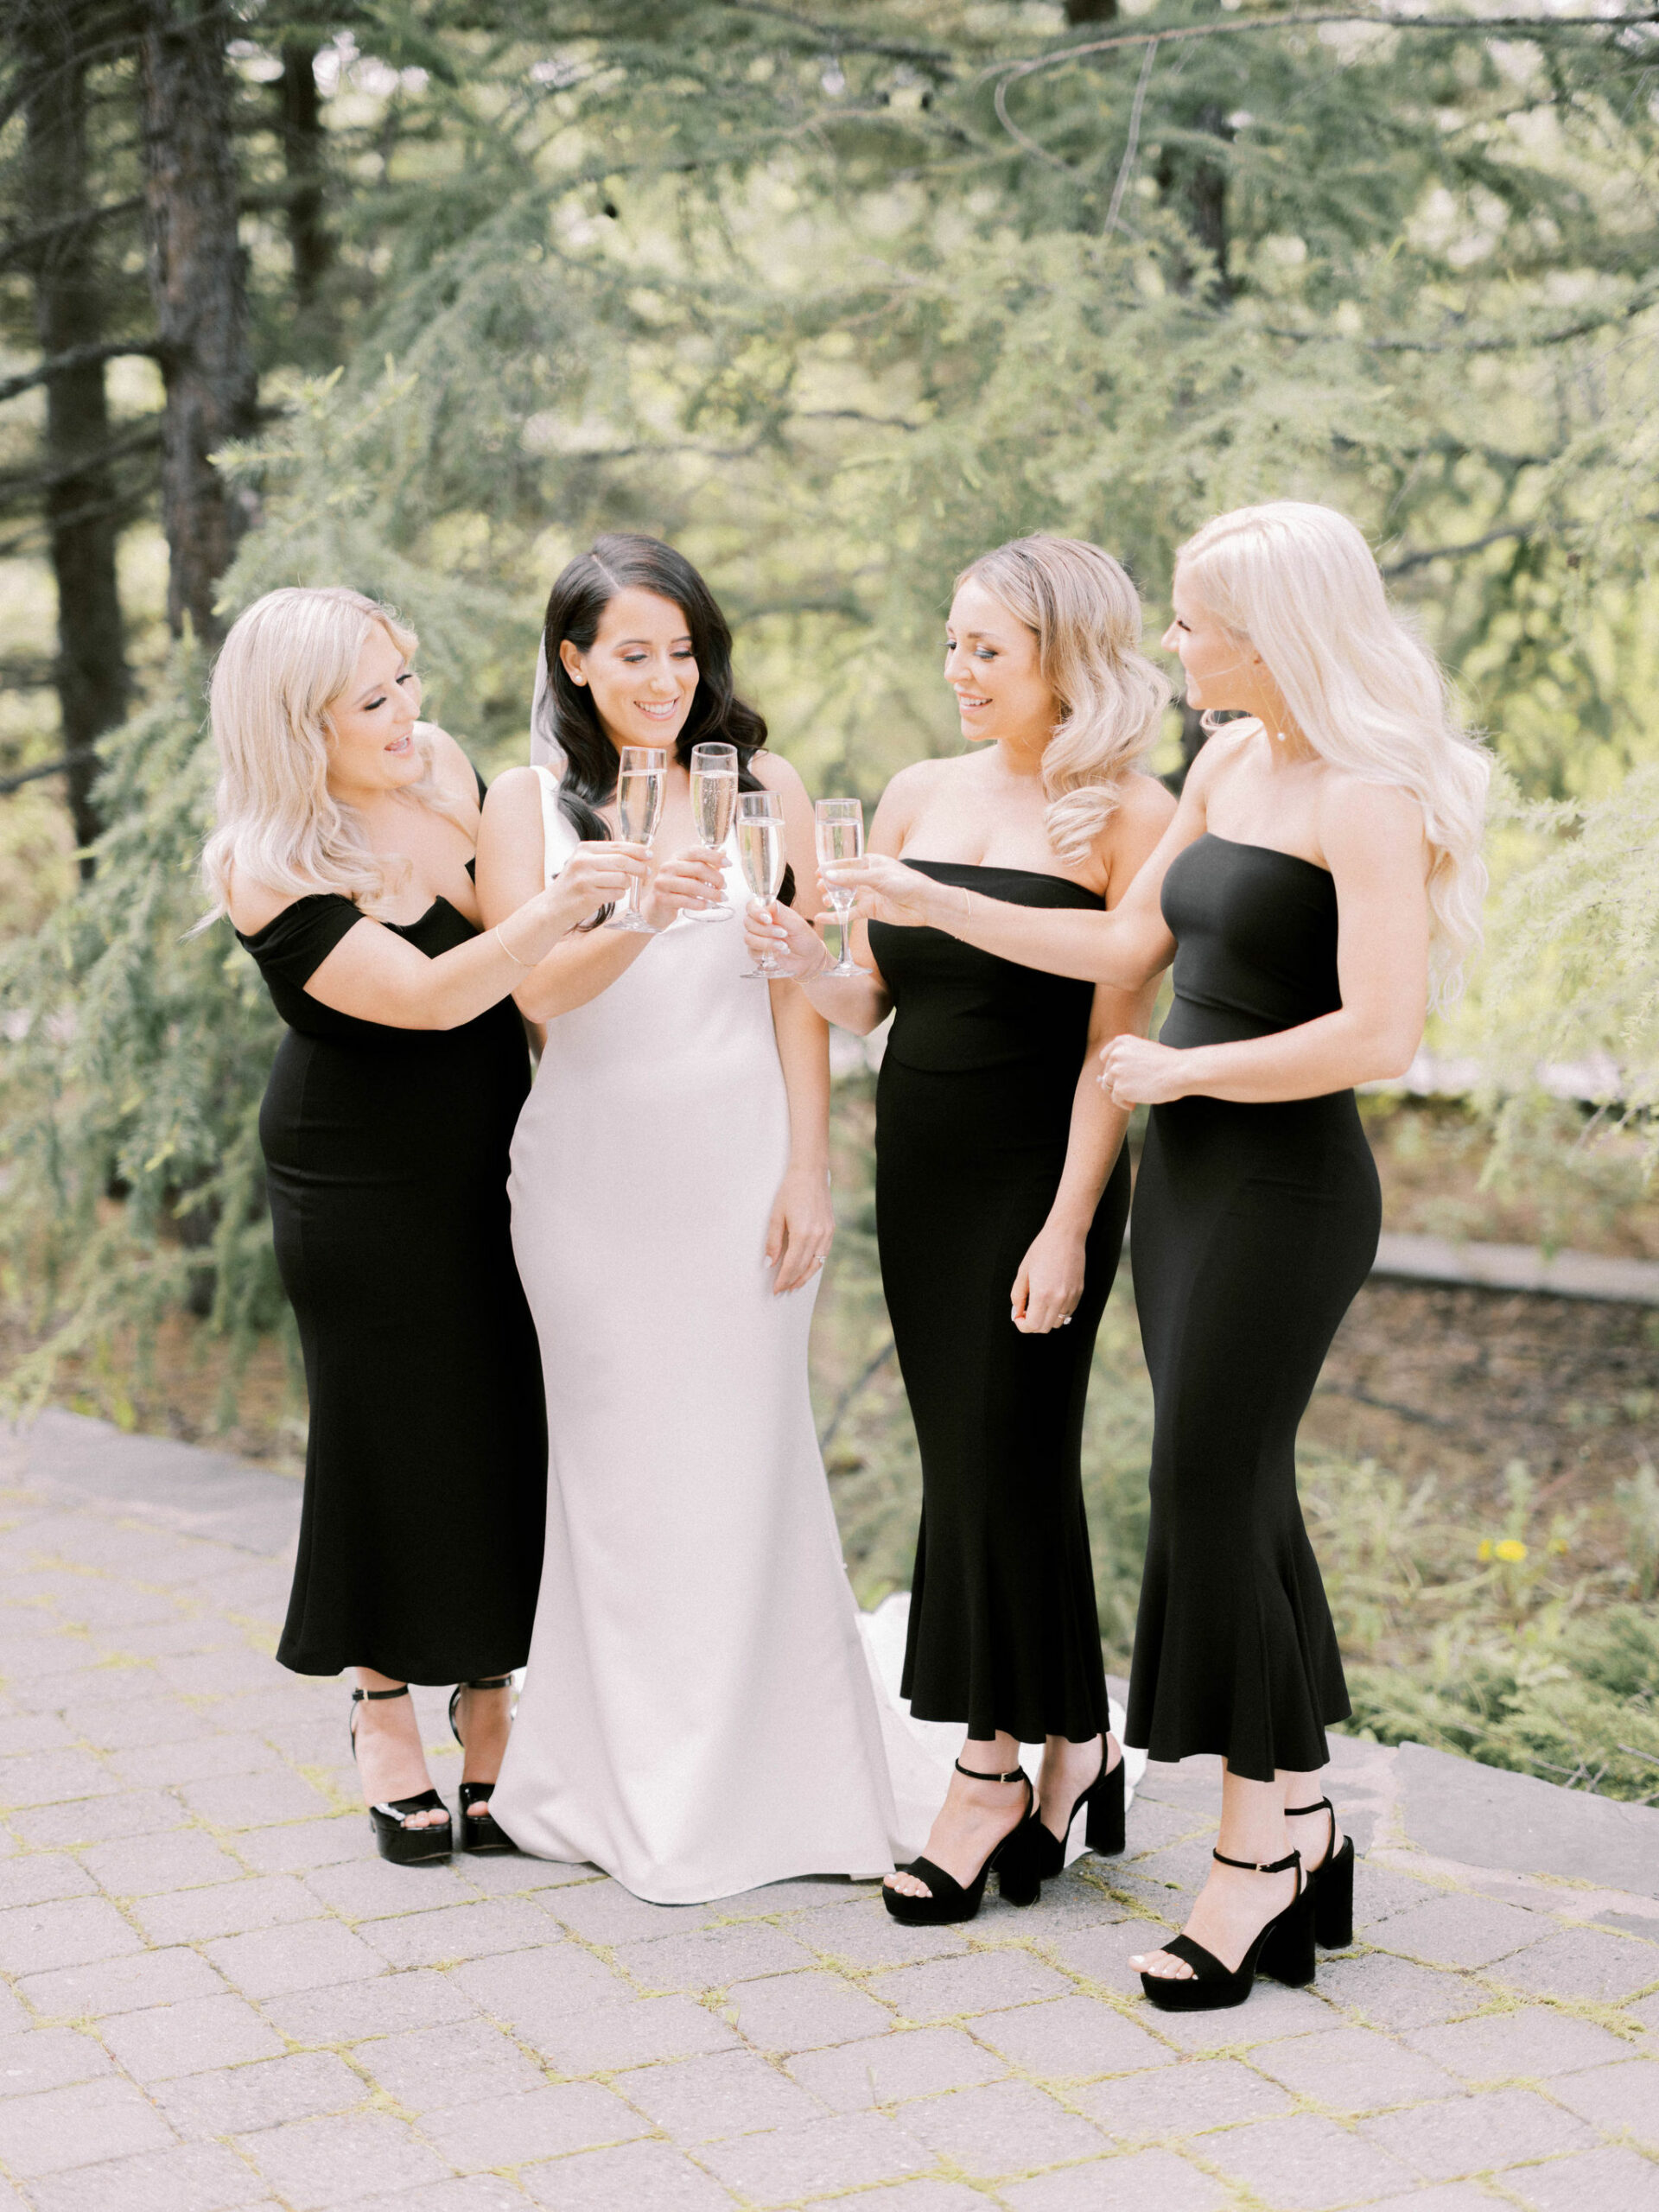 How to not go broke as a bridesmaid, bridesmaid tips, paying for a wedding, bridesmaids cheers with bride, toast to the bride, black bridesmaid dresses, black bridesmaid gowns, chic black tie bridesmaids